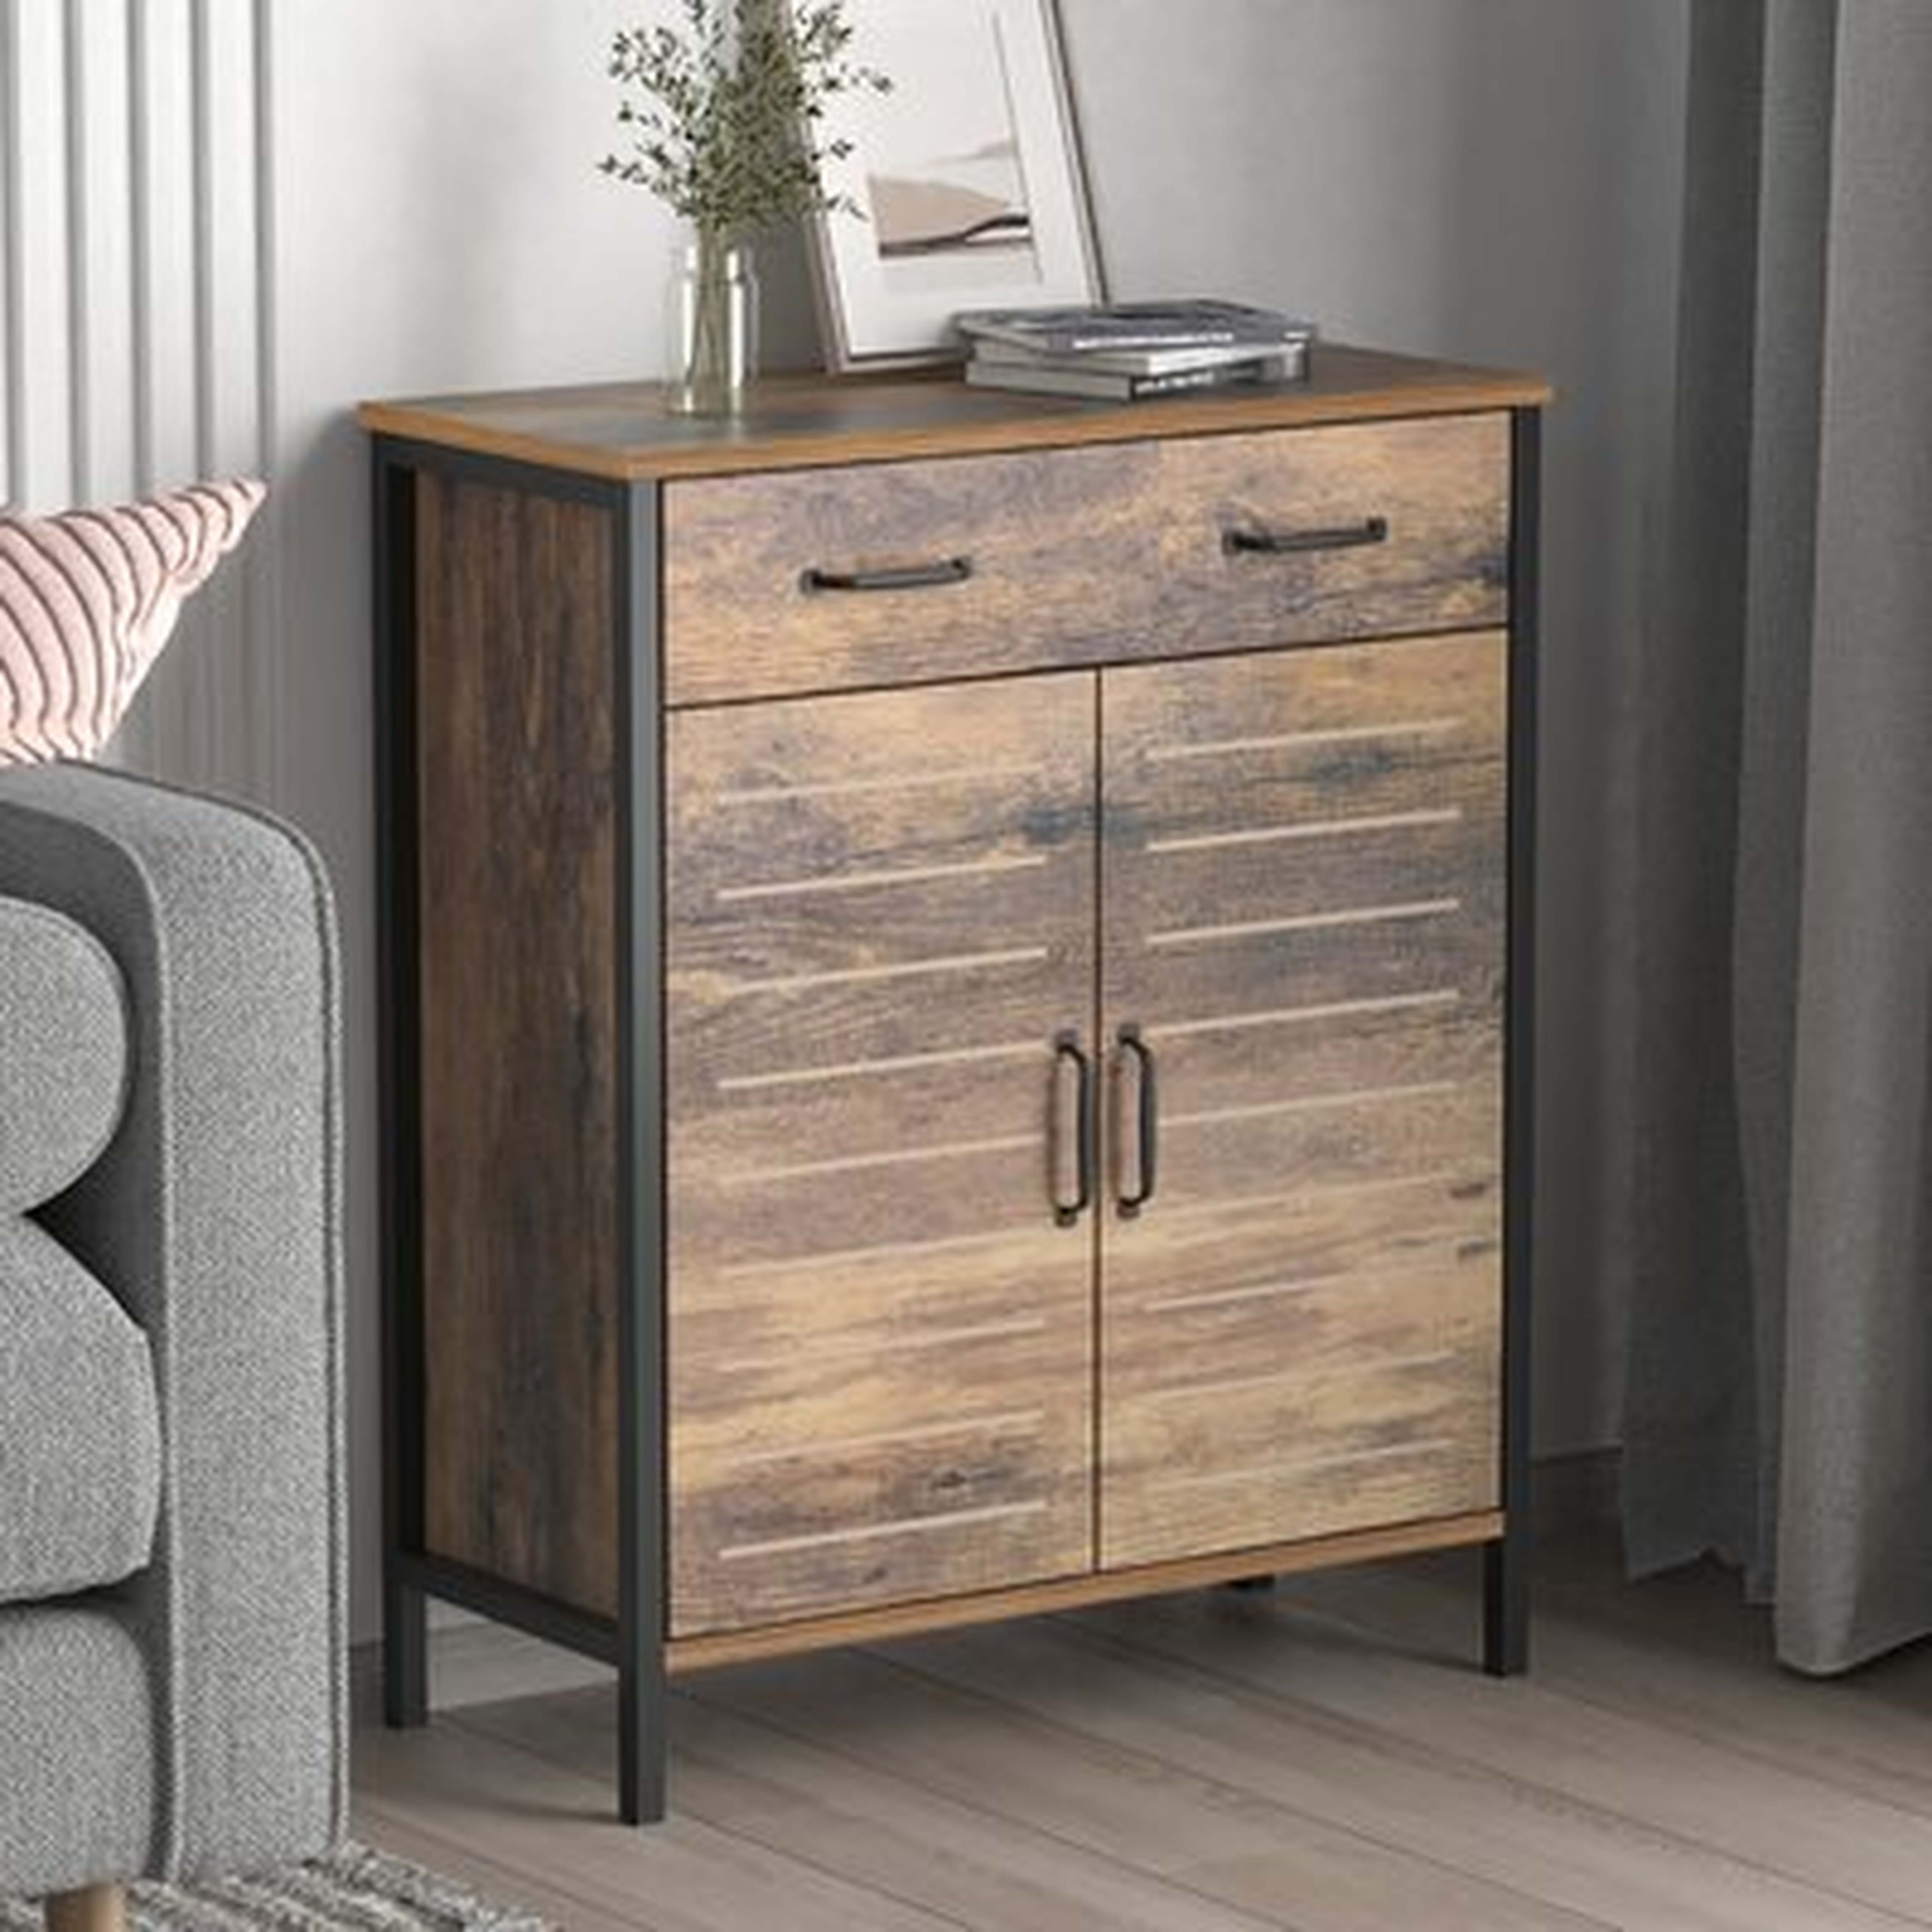 Cabinet With Drawer - Wayfair